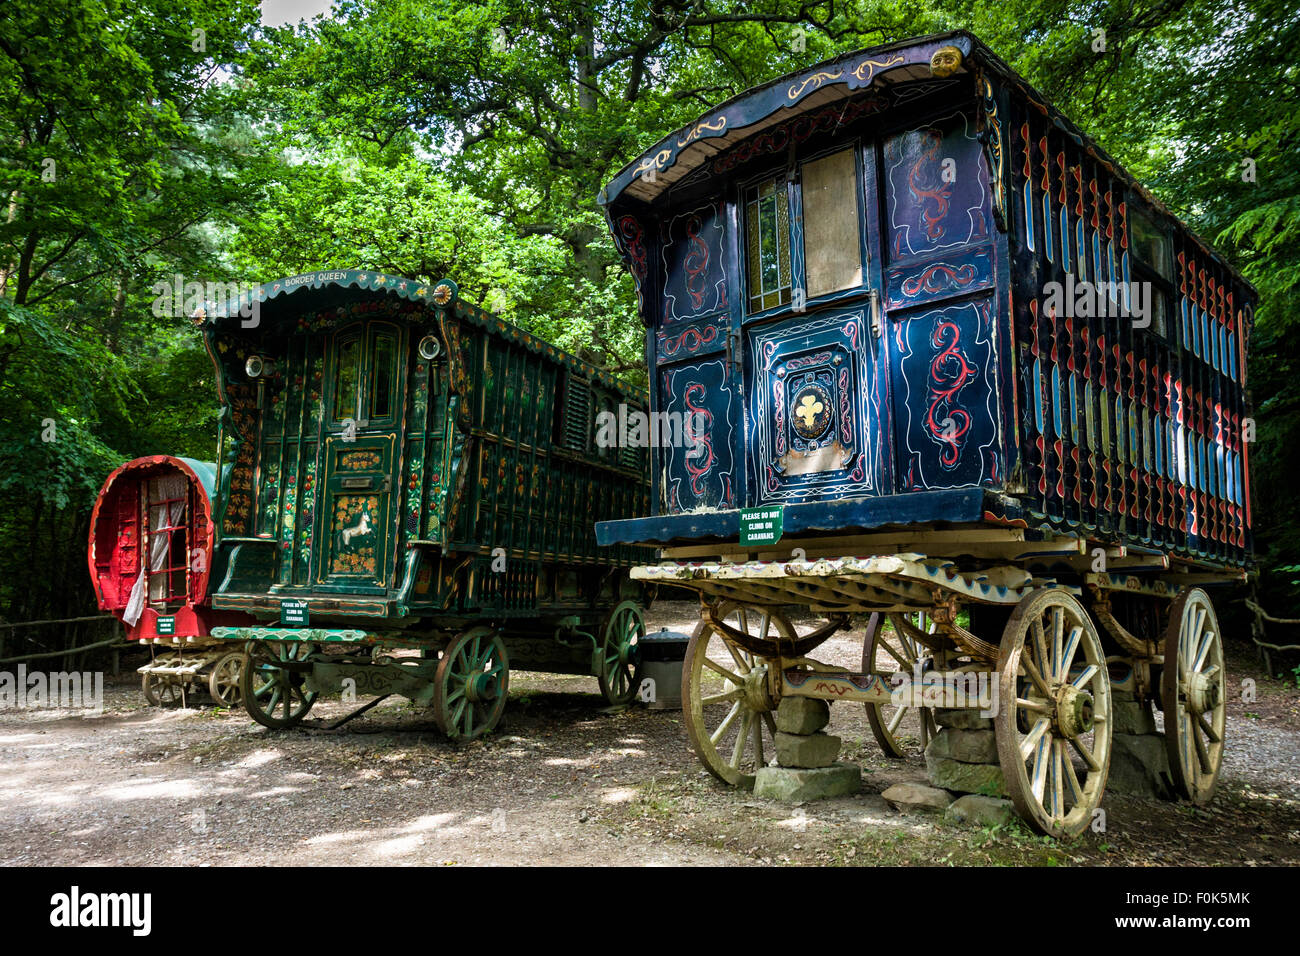 Traditional old Romany gypsy caravans in a woodland clearing at Groombridge Place, Tunbridge Wells, Kent, England Stock Photo